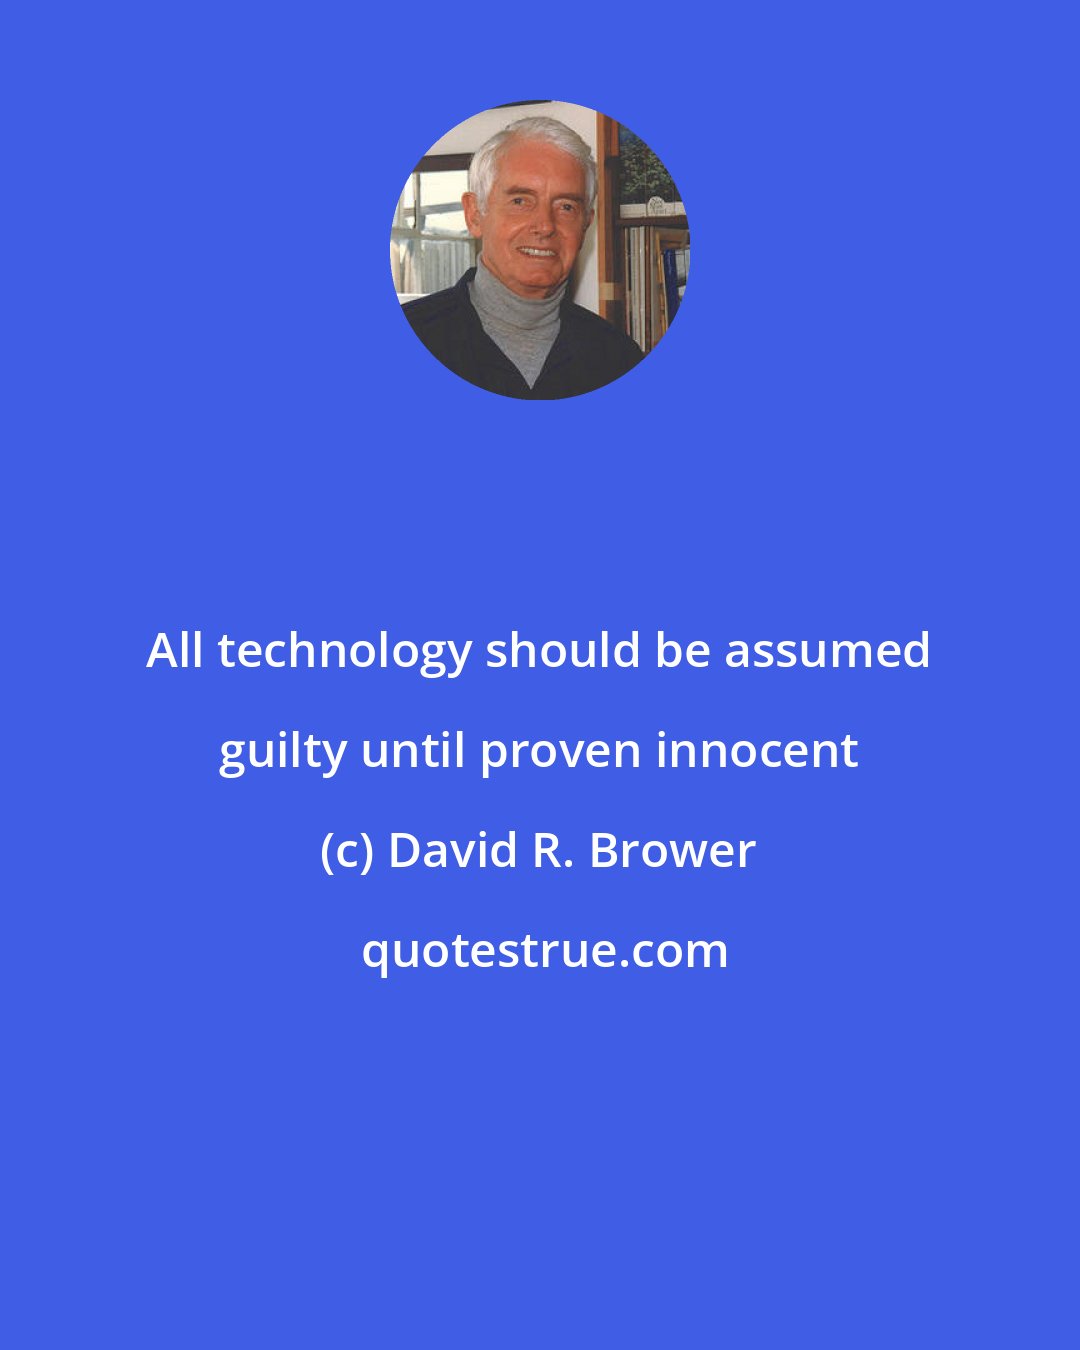 David R. Brower: All technology should be assumed guilty until proven innocent